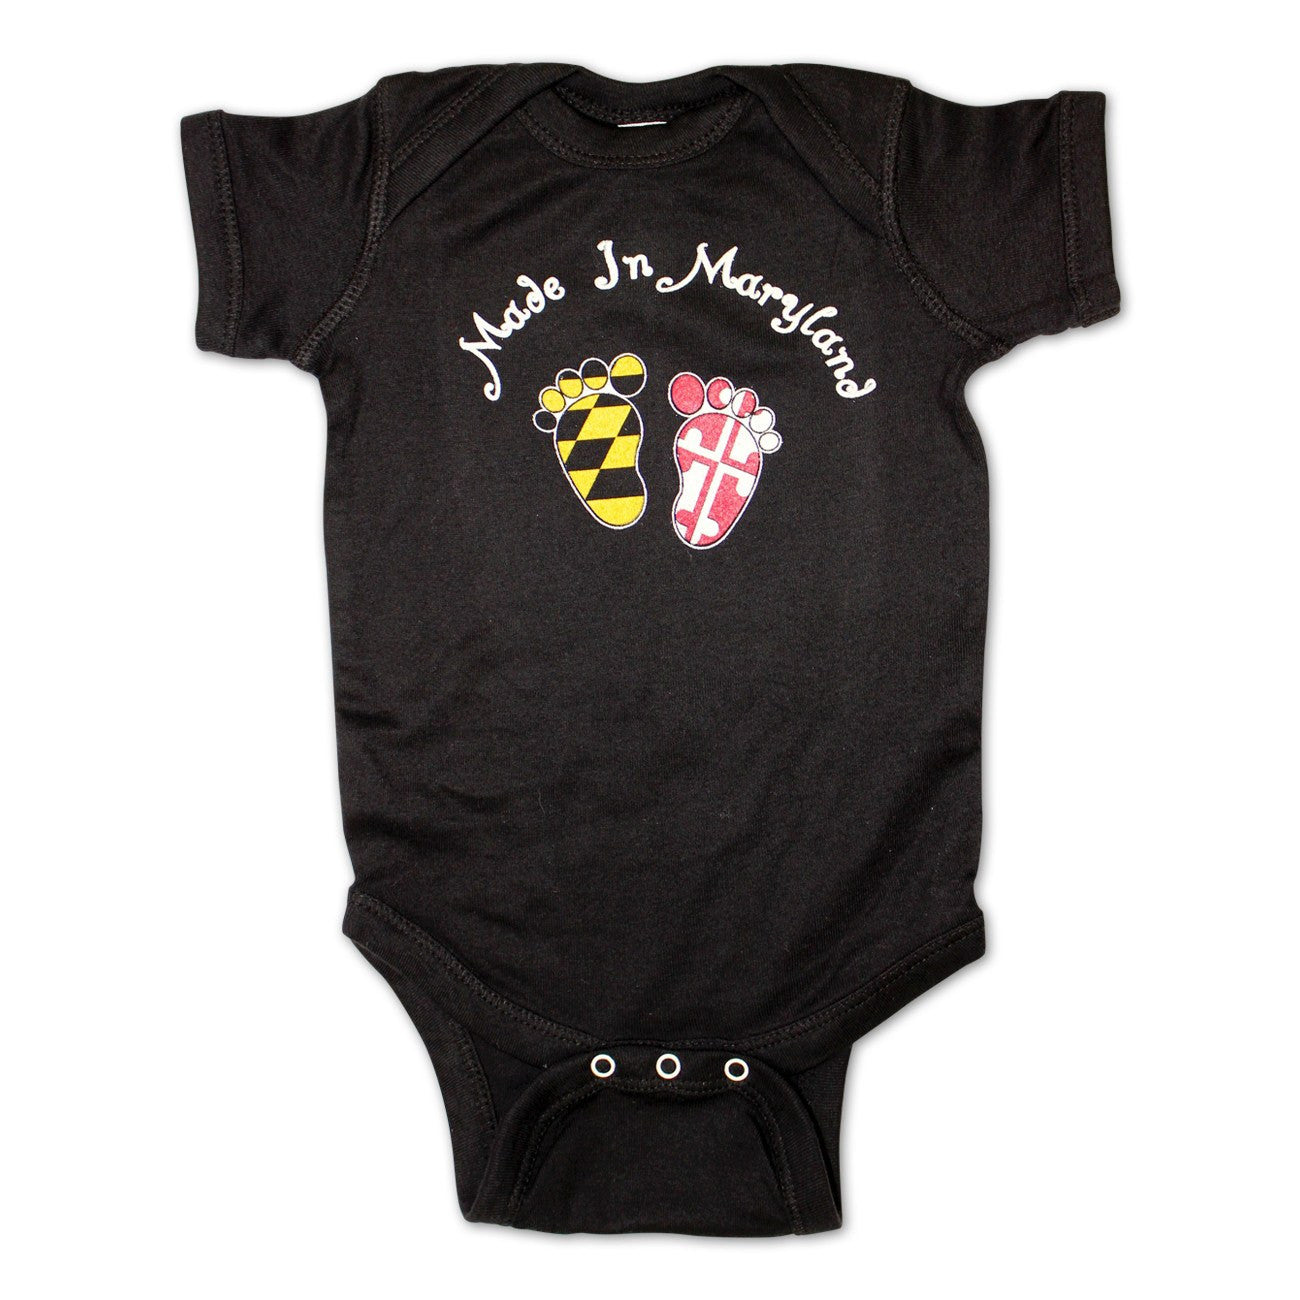 Made in Maryland (Black) / Baby Onesie - Route One Apparel